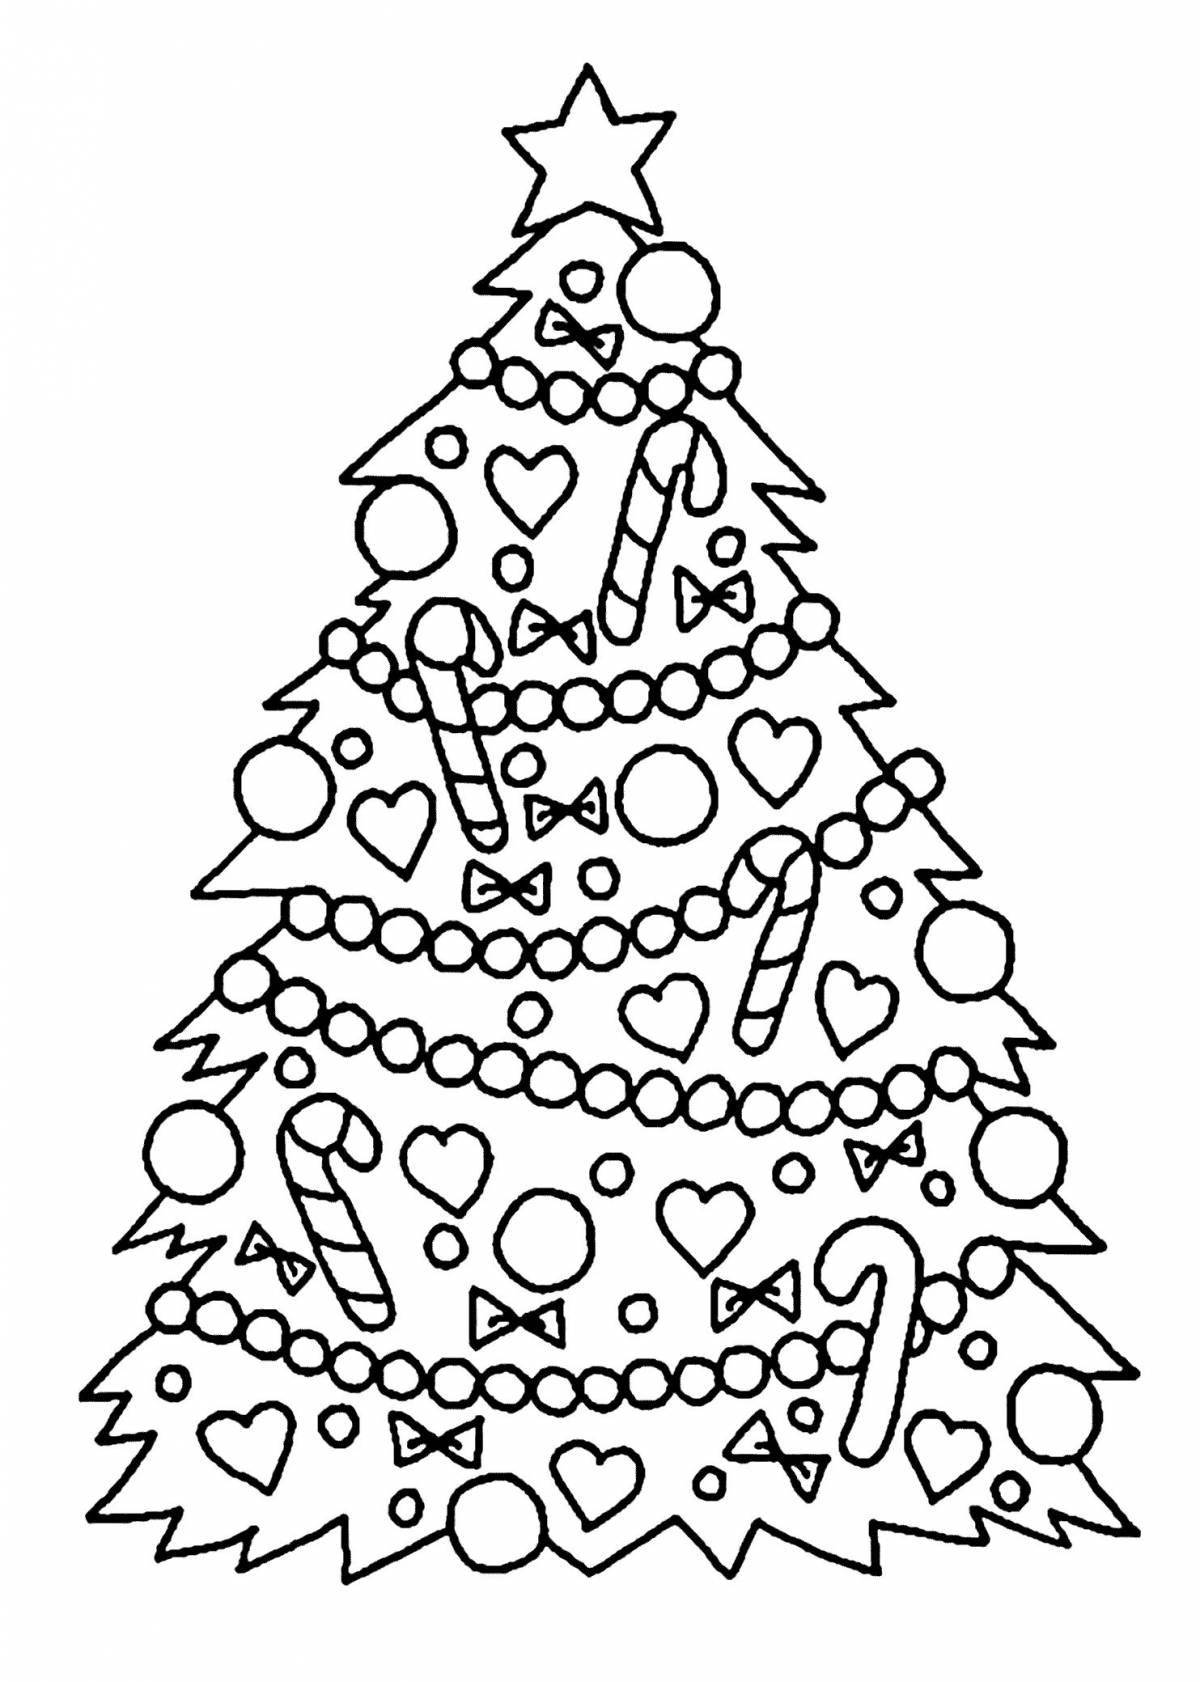 Glowing Christmas tree coloring page